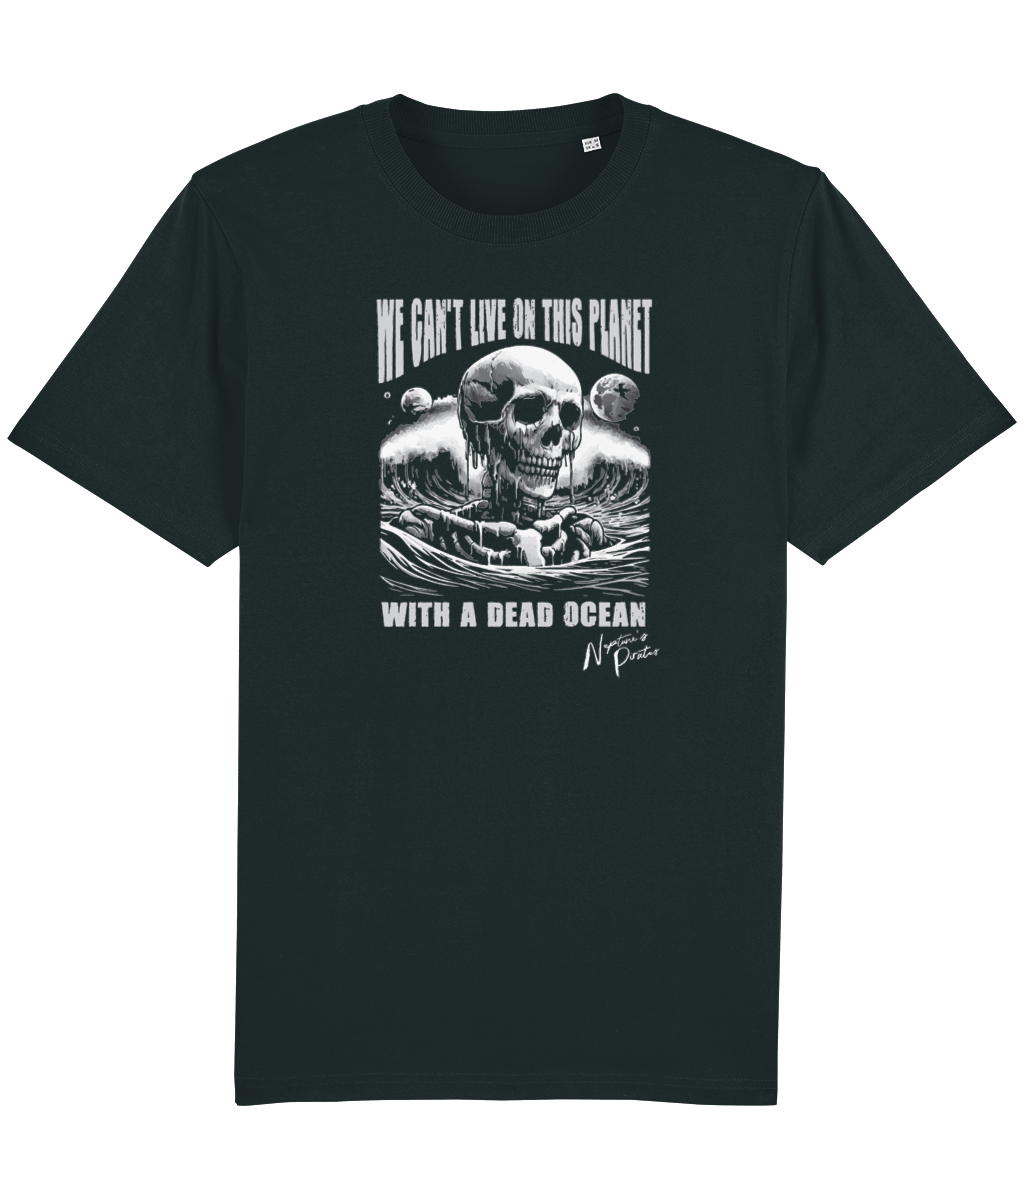 'We can't live on this planet with a dead ocean' Unisex Heavy T-Shirt Logo Front